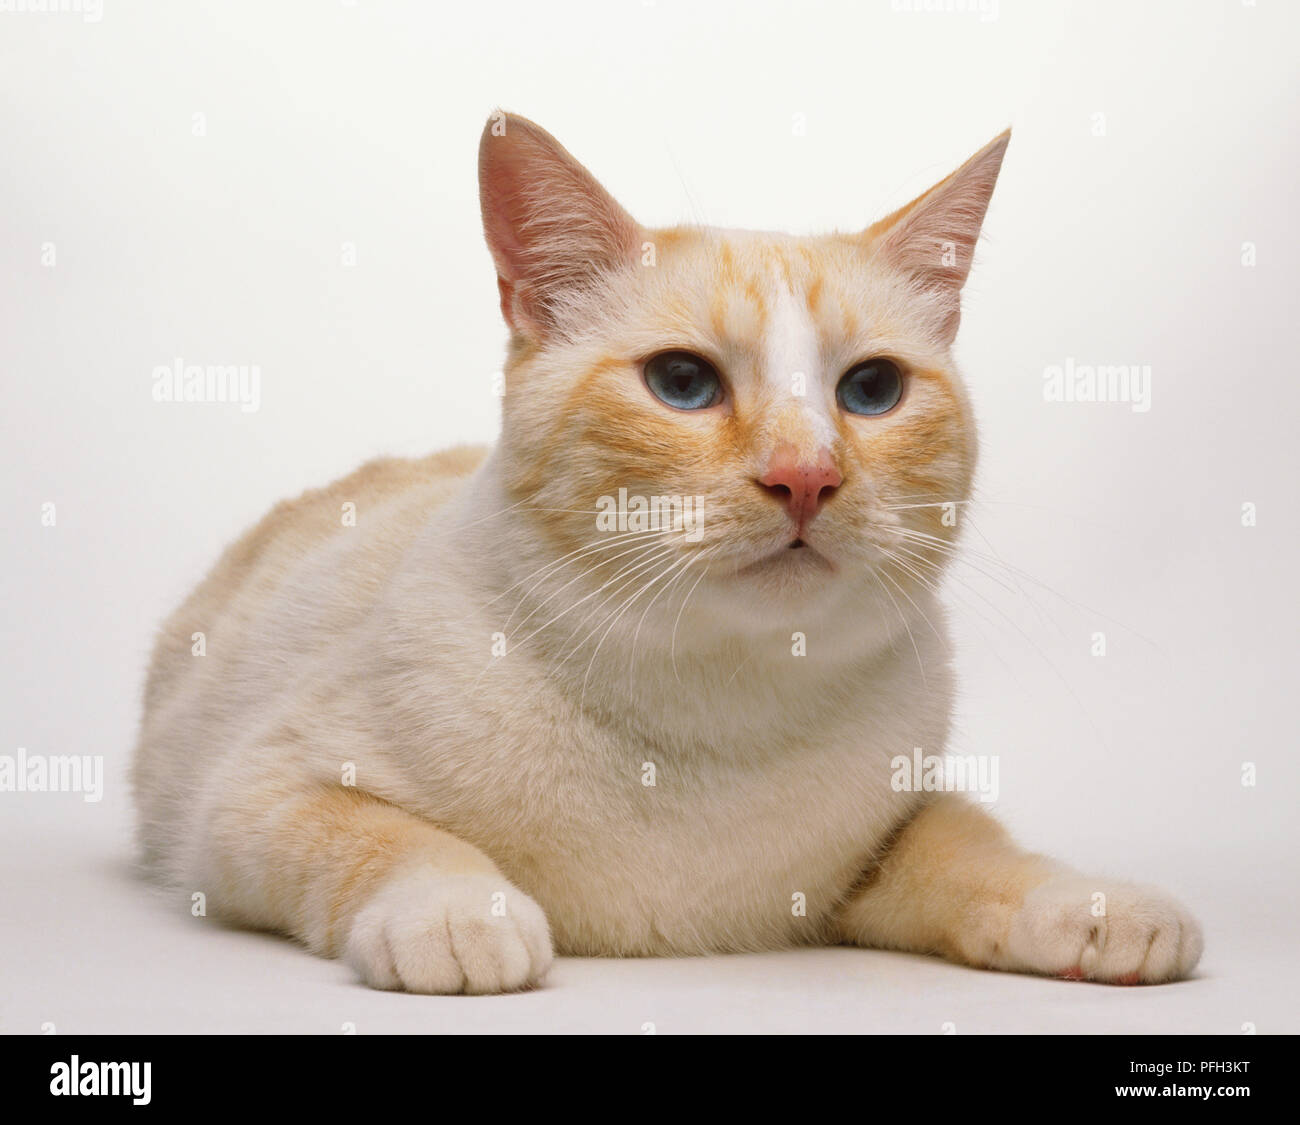 Blue-eyed white and light brown Cat (Felis catus) lying down on the floor with its paws outstretched, front view Stock Photo